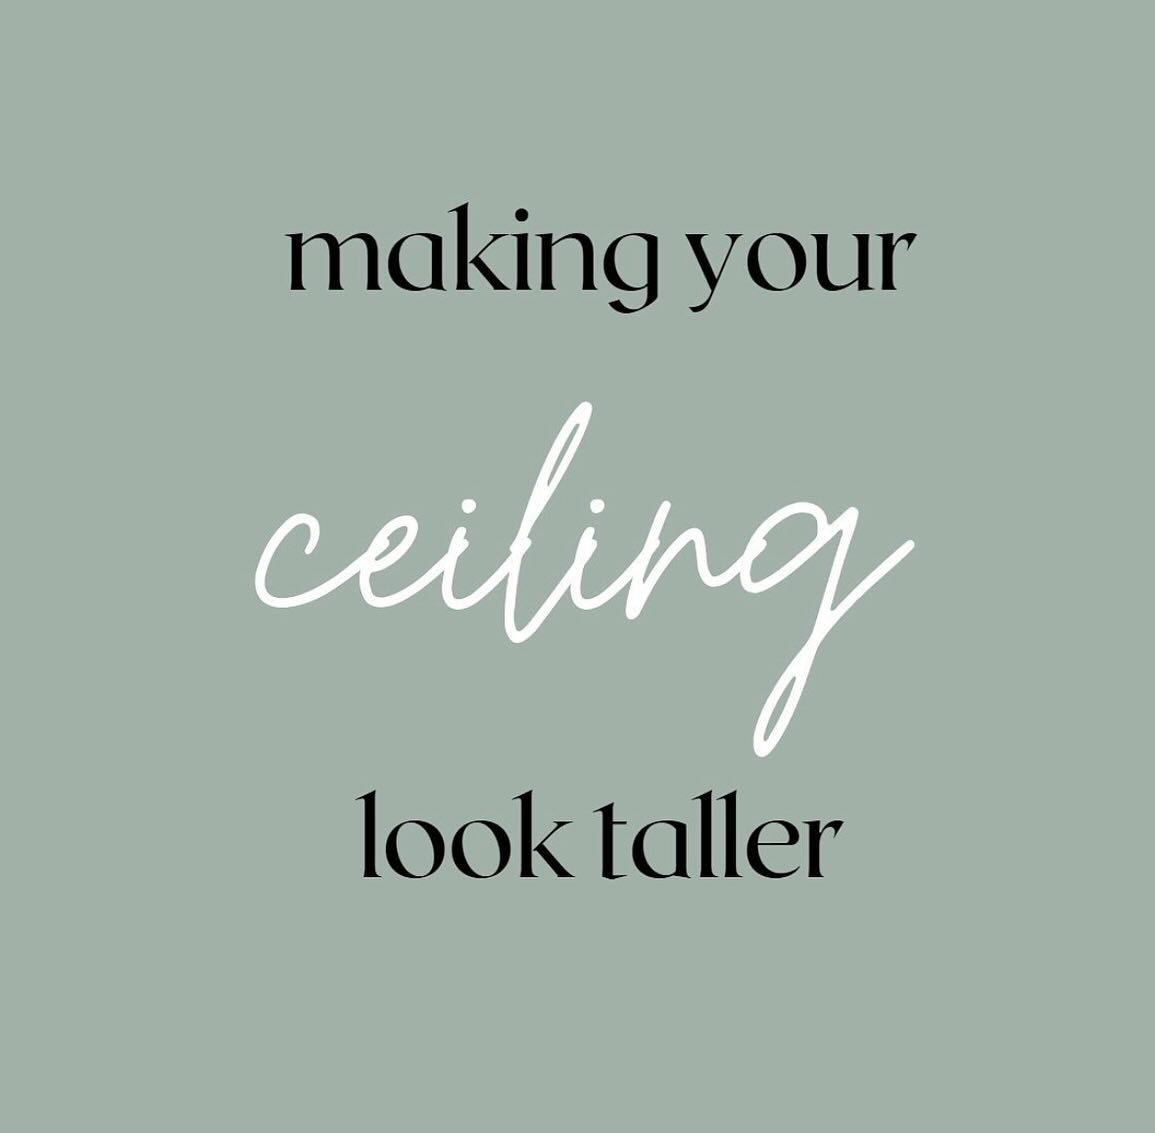 Here are four tips on making your ceilings look taller

▪️Photo number 1
Don&rsquo;t underestimate the power of wall treatments

We love adding wall treatments to bring more dimension into a home, but they can actually make your ceilings feel taller 